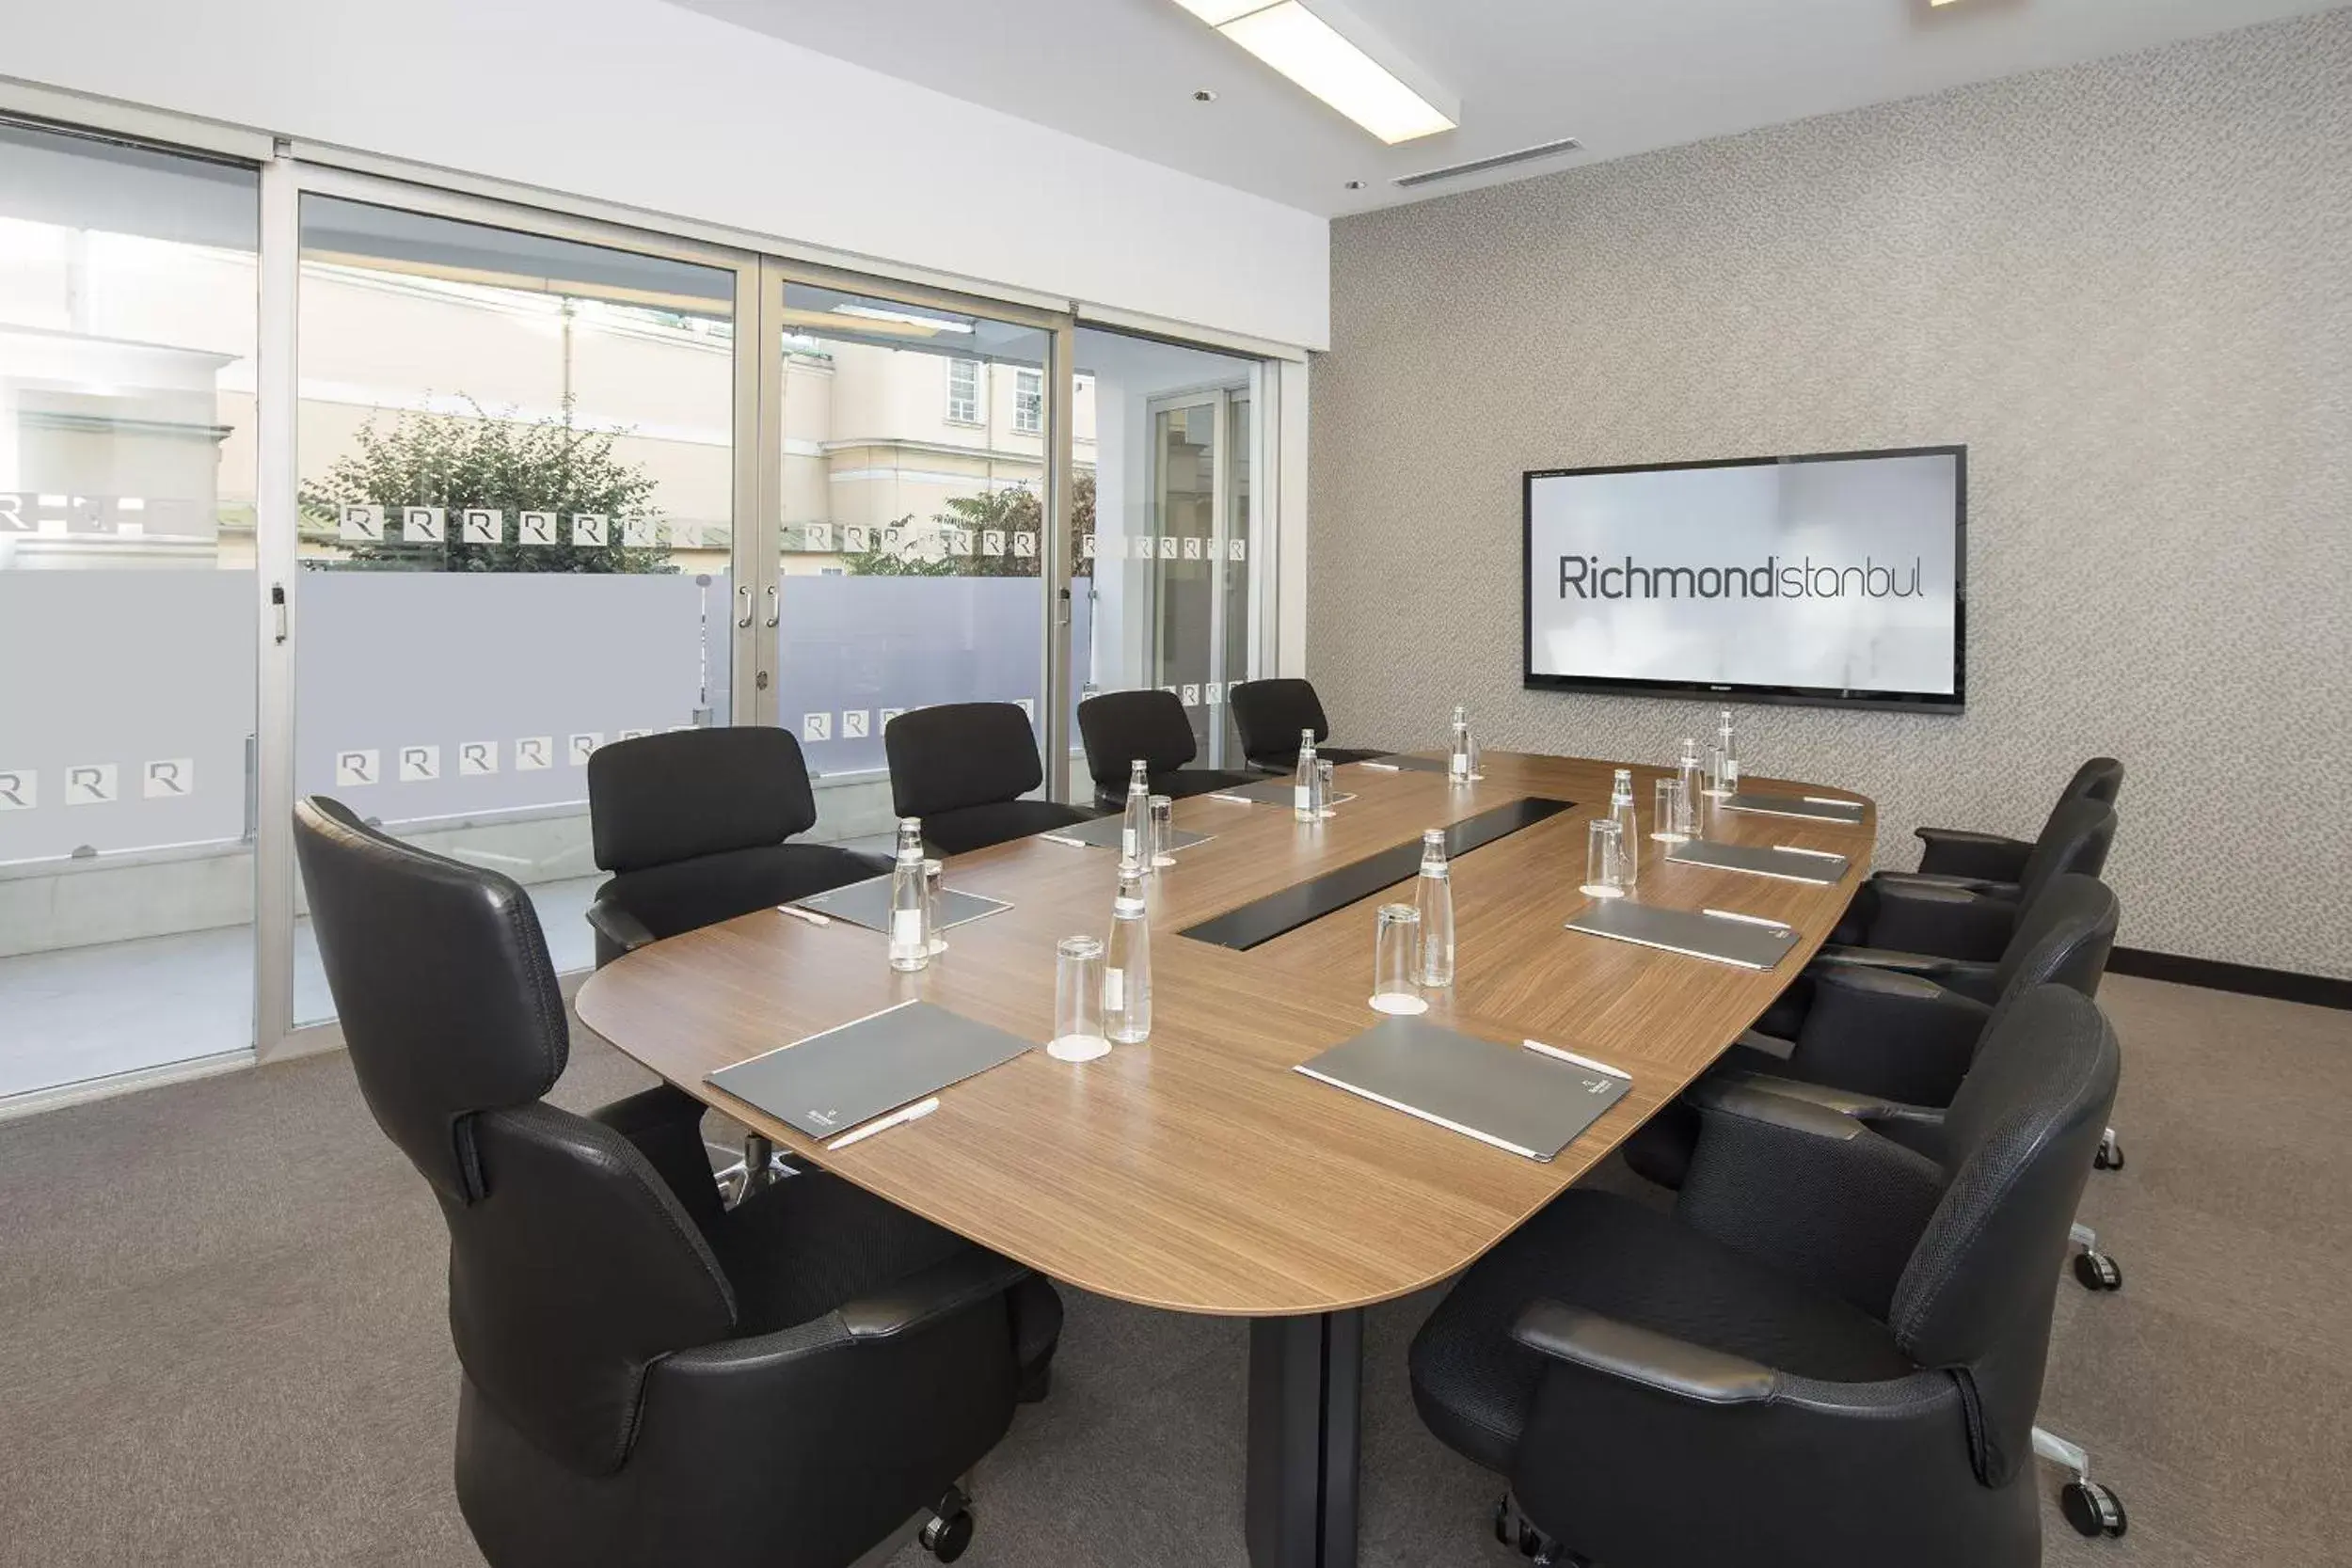 Meeting/conference room in Richmond Istanbul